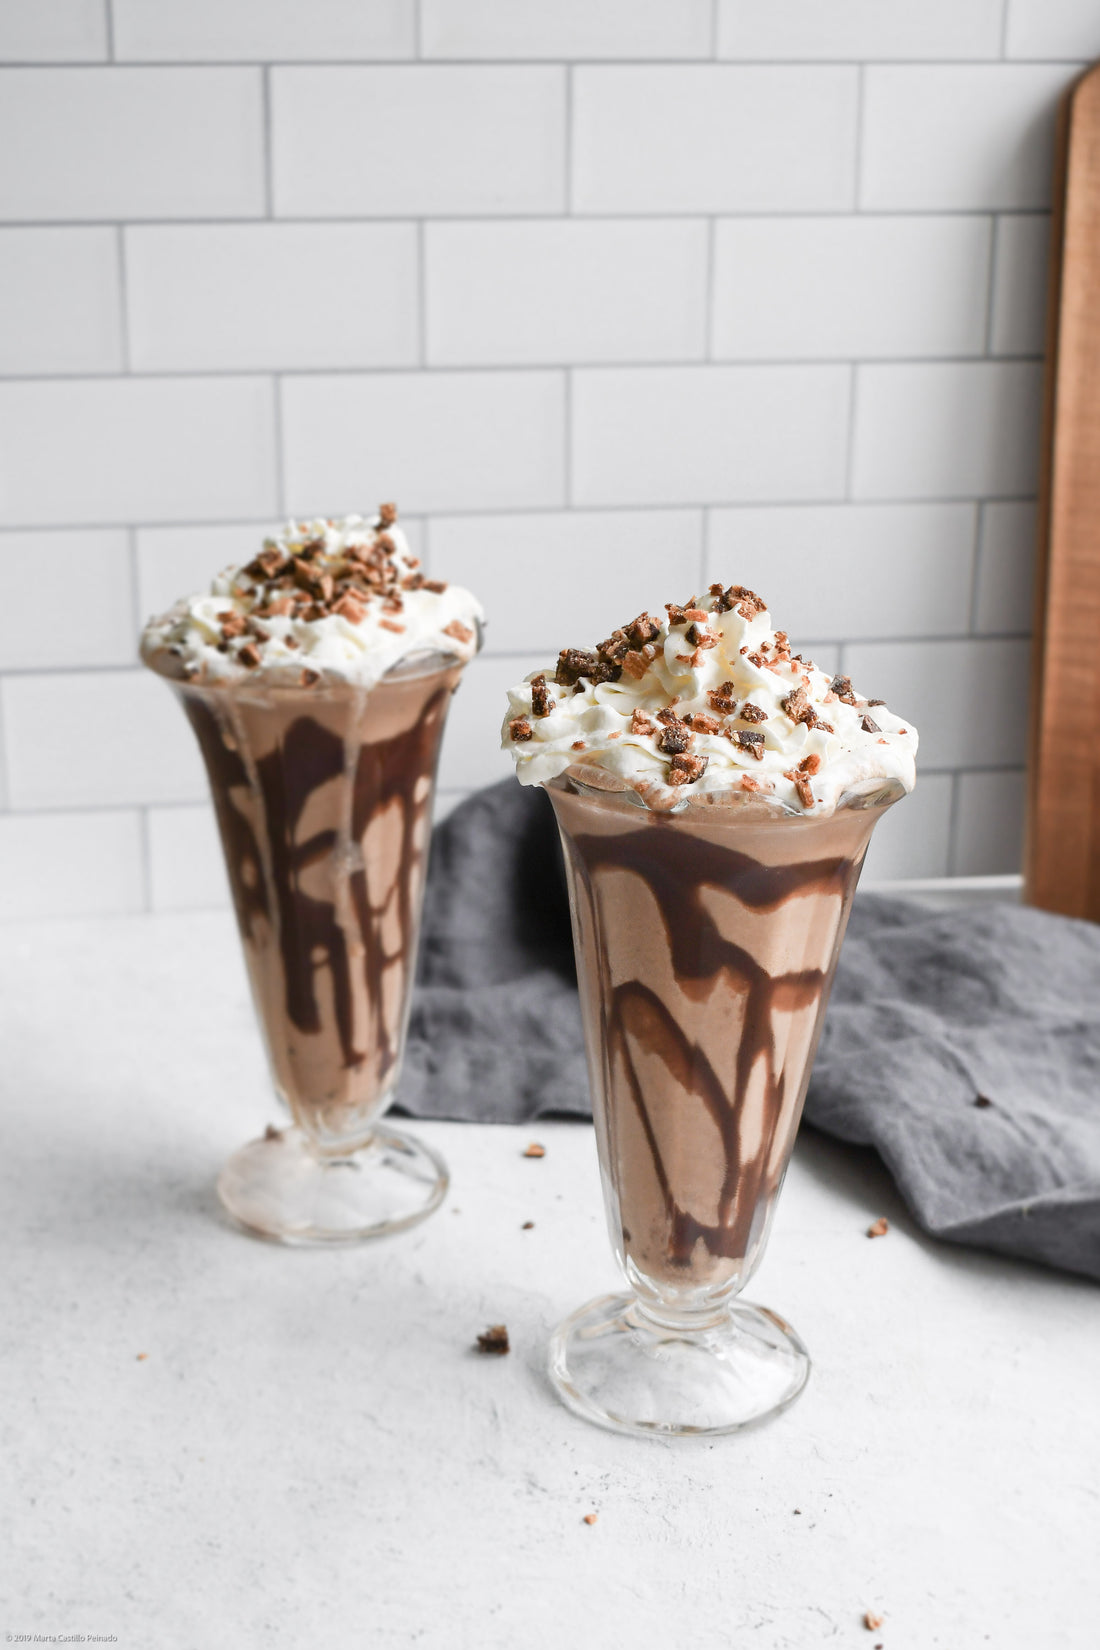 Chocolate Smoothie with whipped cream and Cinnamon Date Swirls